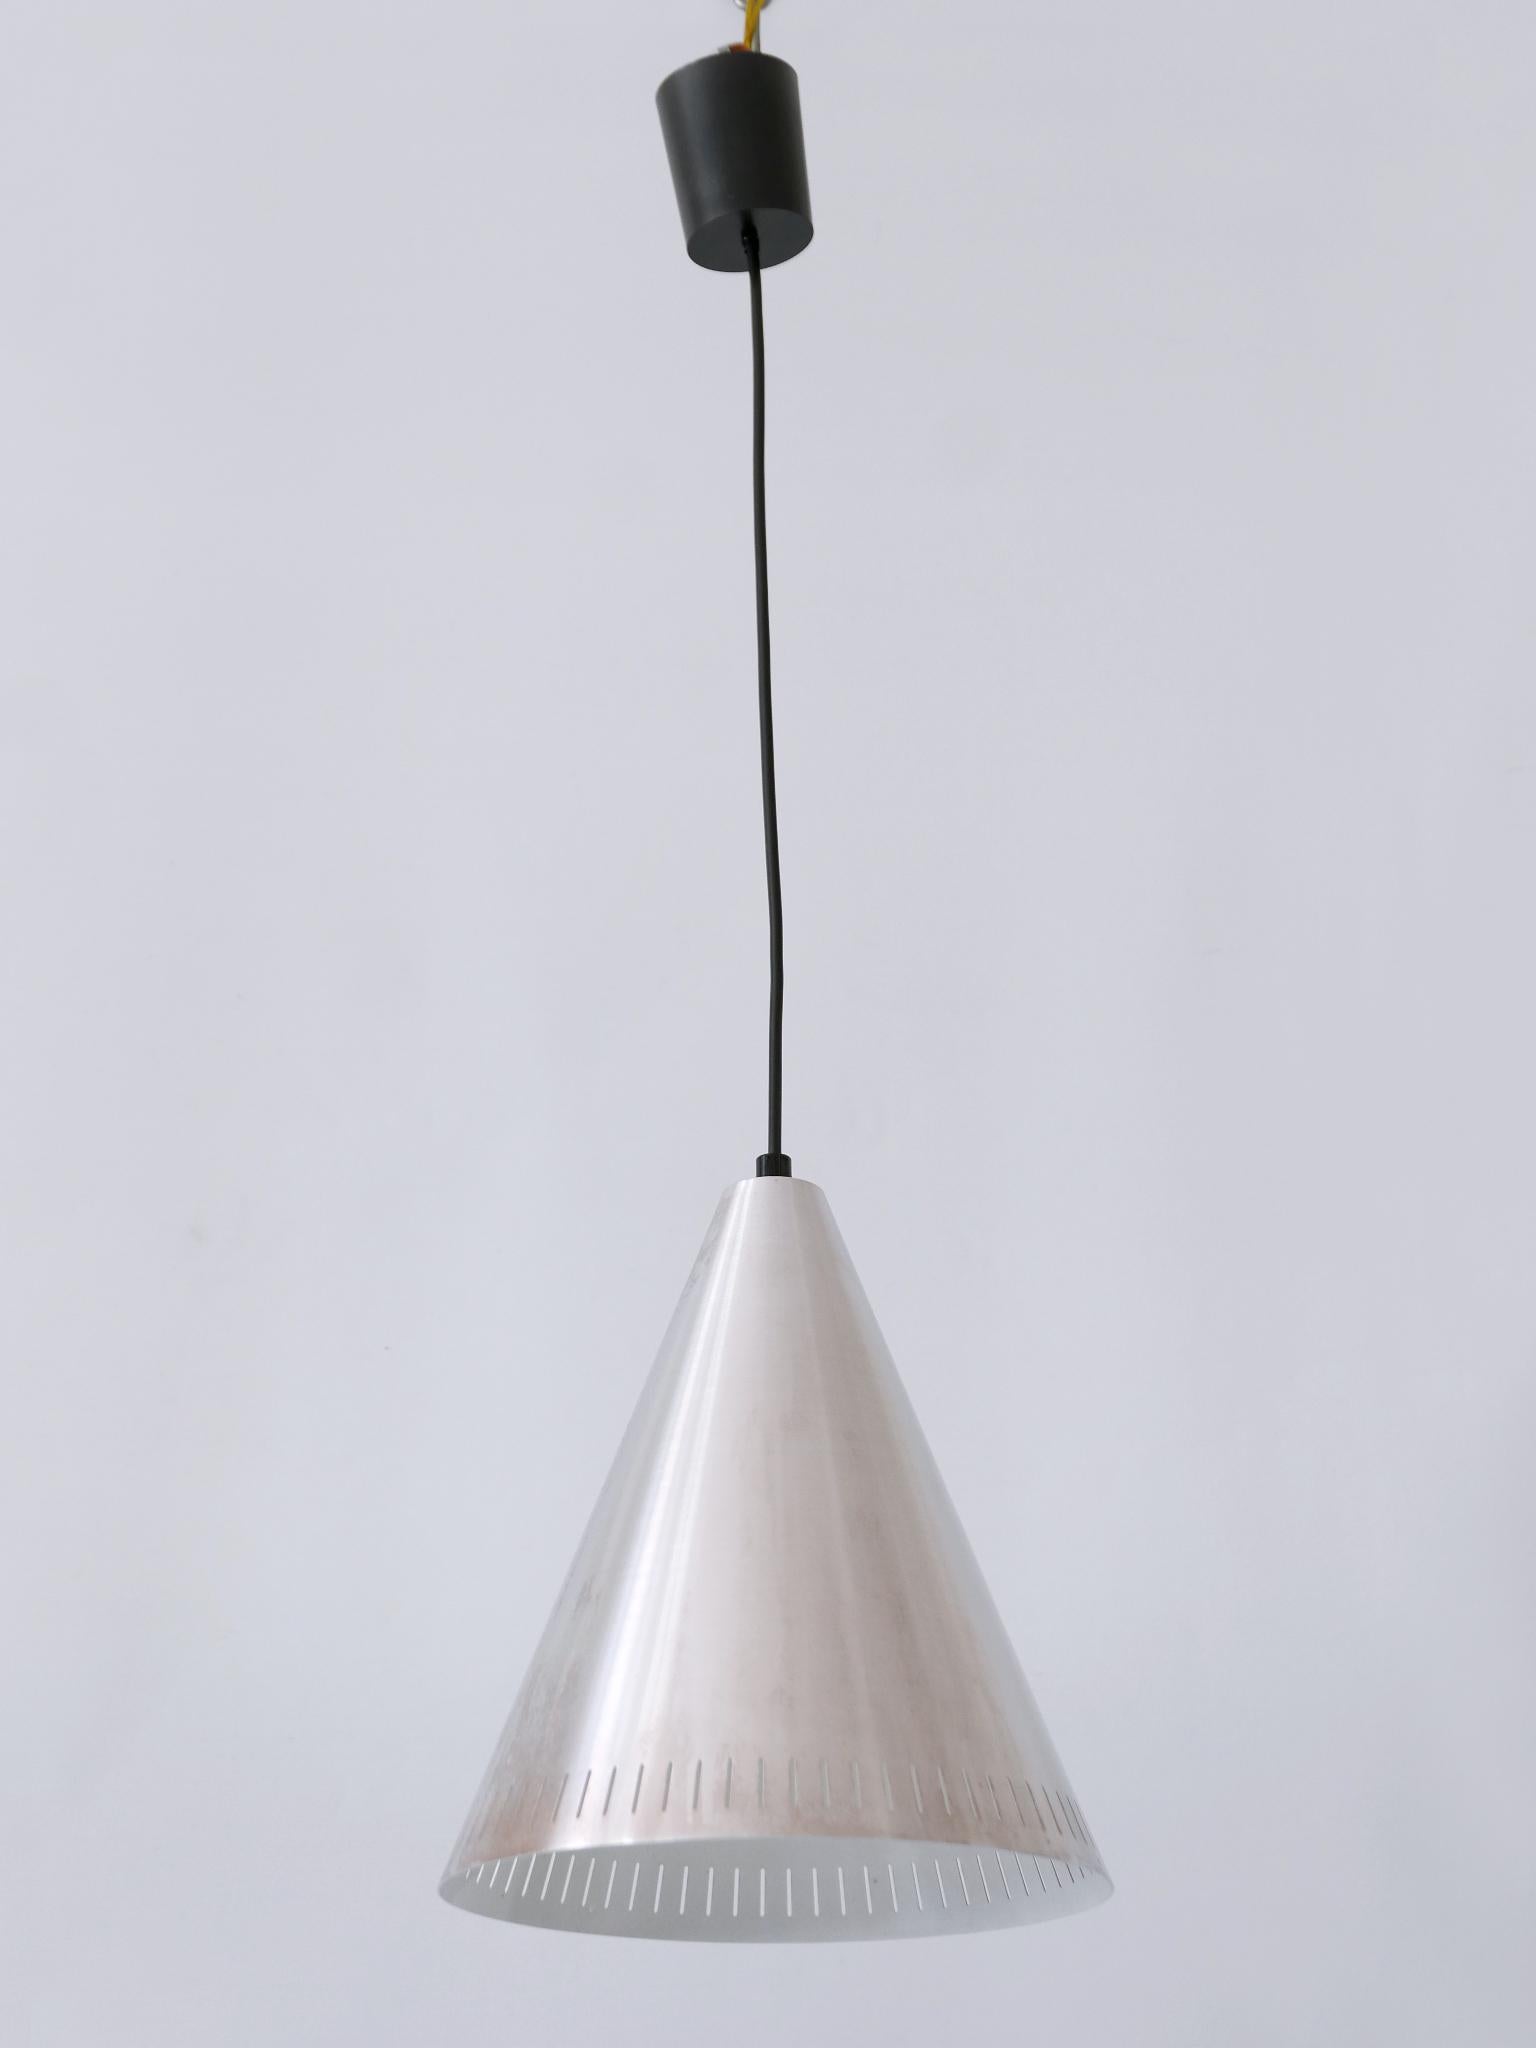 Set of Four Mid Century Modern Aluminium Pendant Lamps by Goldkant 1970s Germany For Sale 4